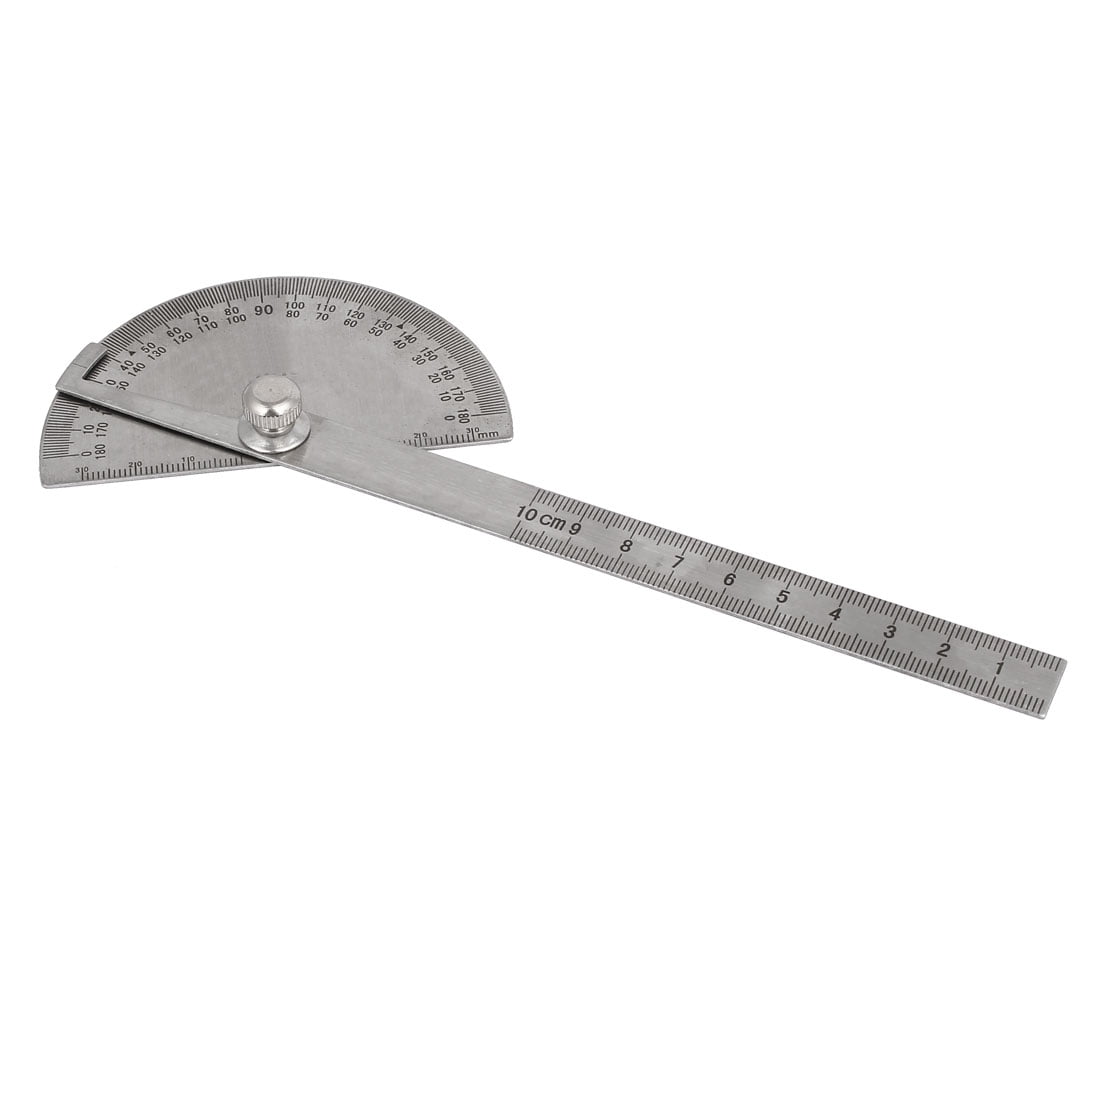 Common Rule Gauge Metal Protractor Kit Measurement Tool Rotary Usual Daily Angle 